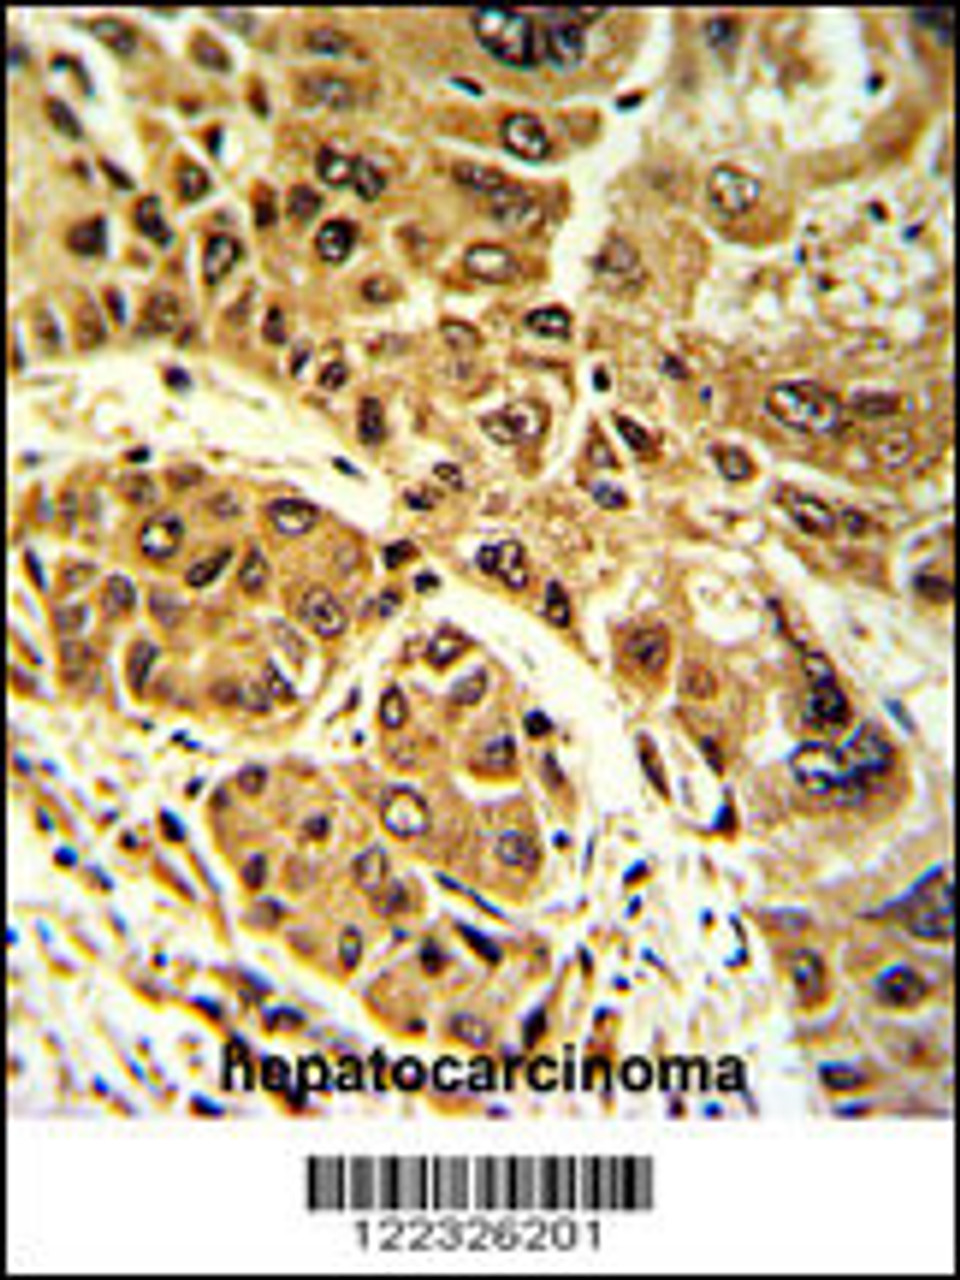 Formalin-fixed and paraffin-embedded human hepatocarcinoma with LPIN2 Antibody, which was peroxidase-conjugated to the secondary antibody, followed by DAB staining.